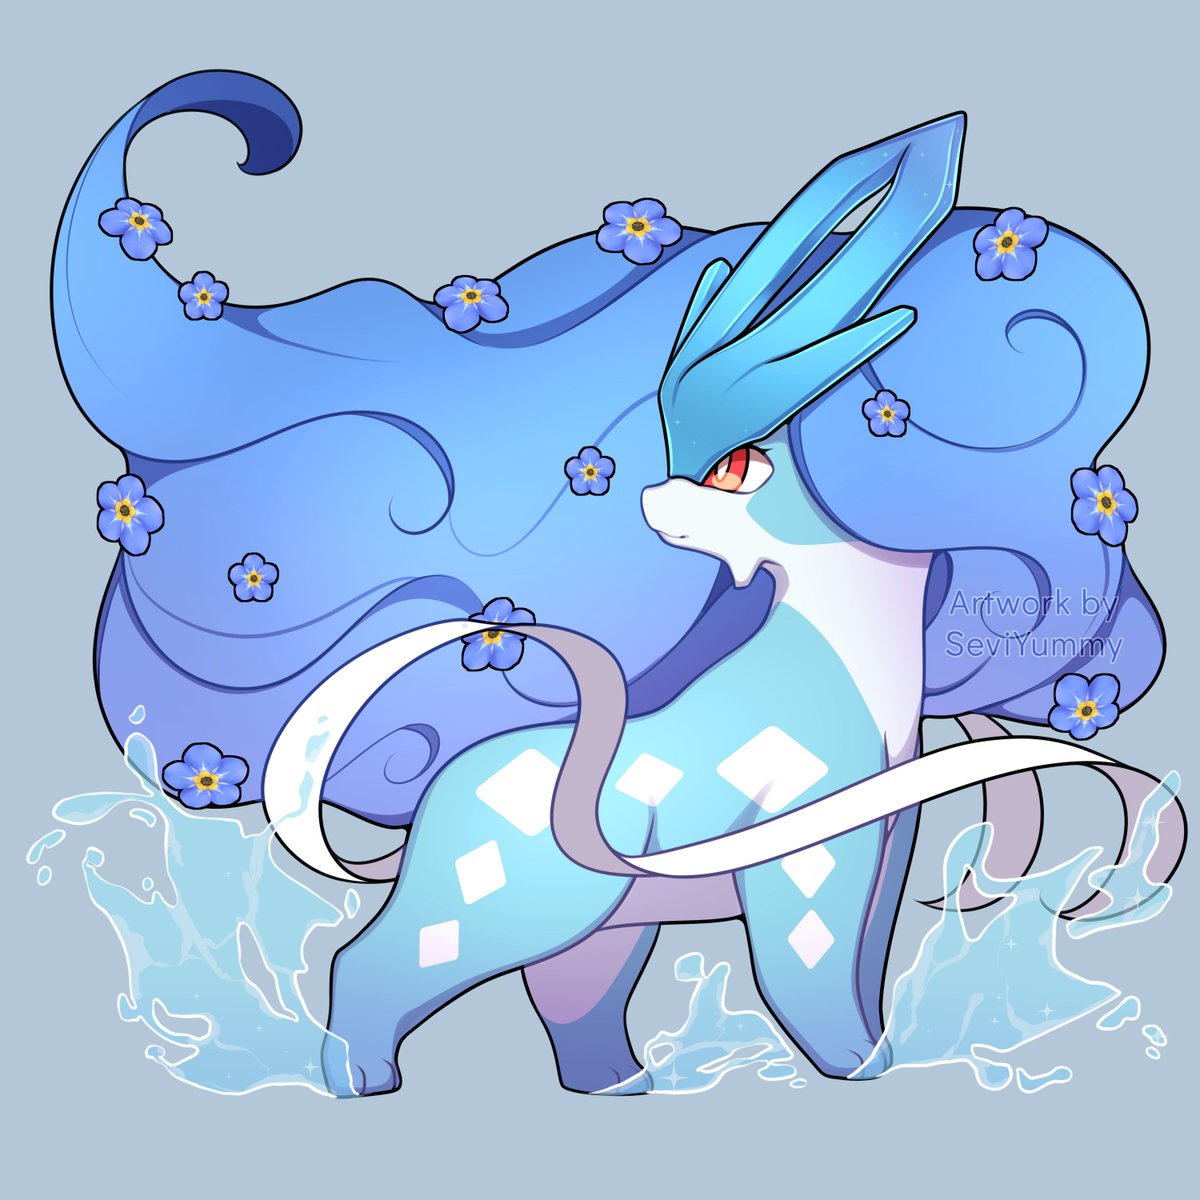 「Suicune 💙 」|Sevi 🌸🌿のイラスト